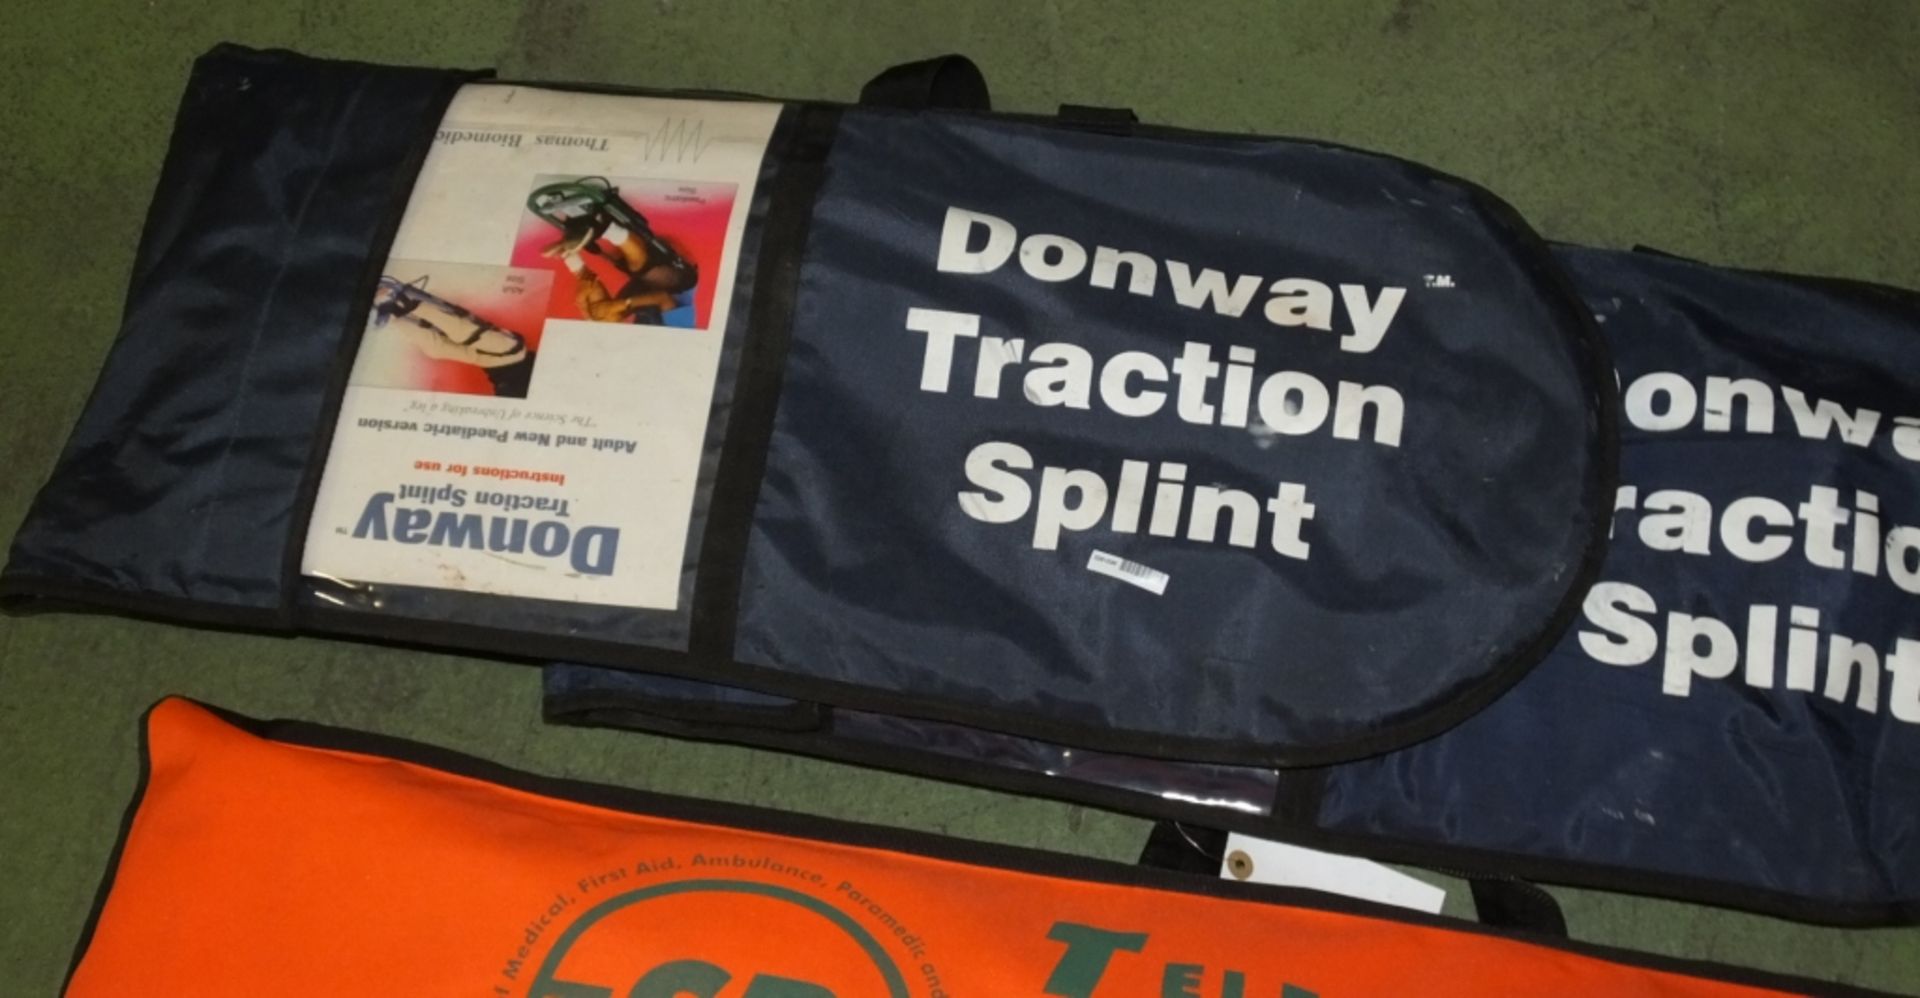 Telford Extriction Device, 2x Donway Traction Splints - Image 2 of 3